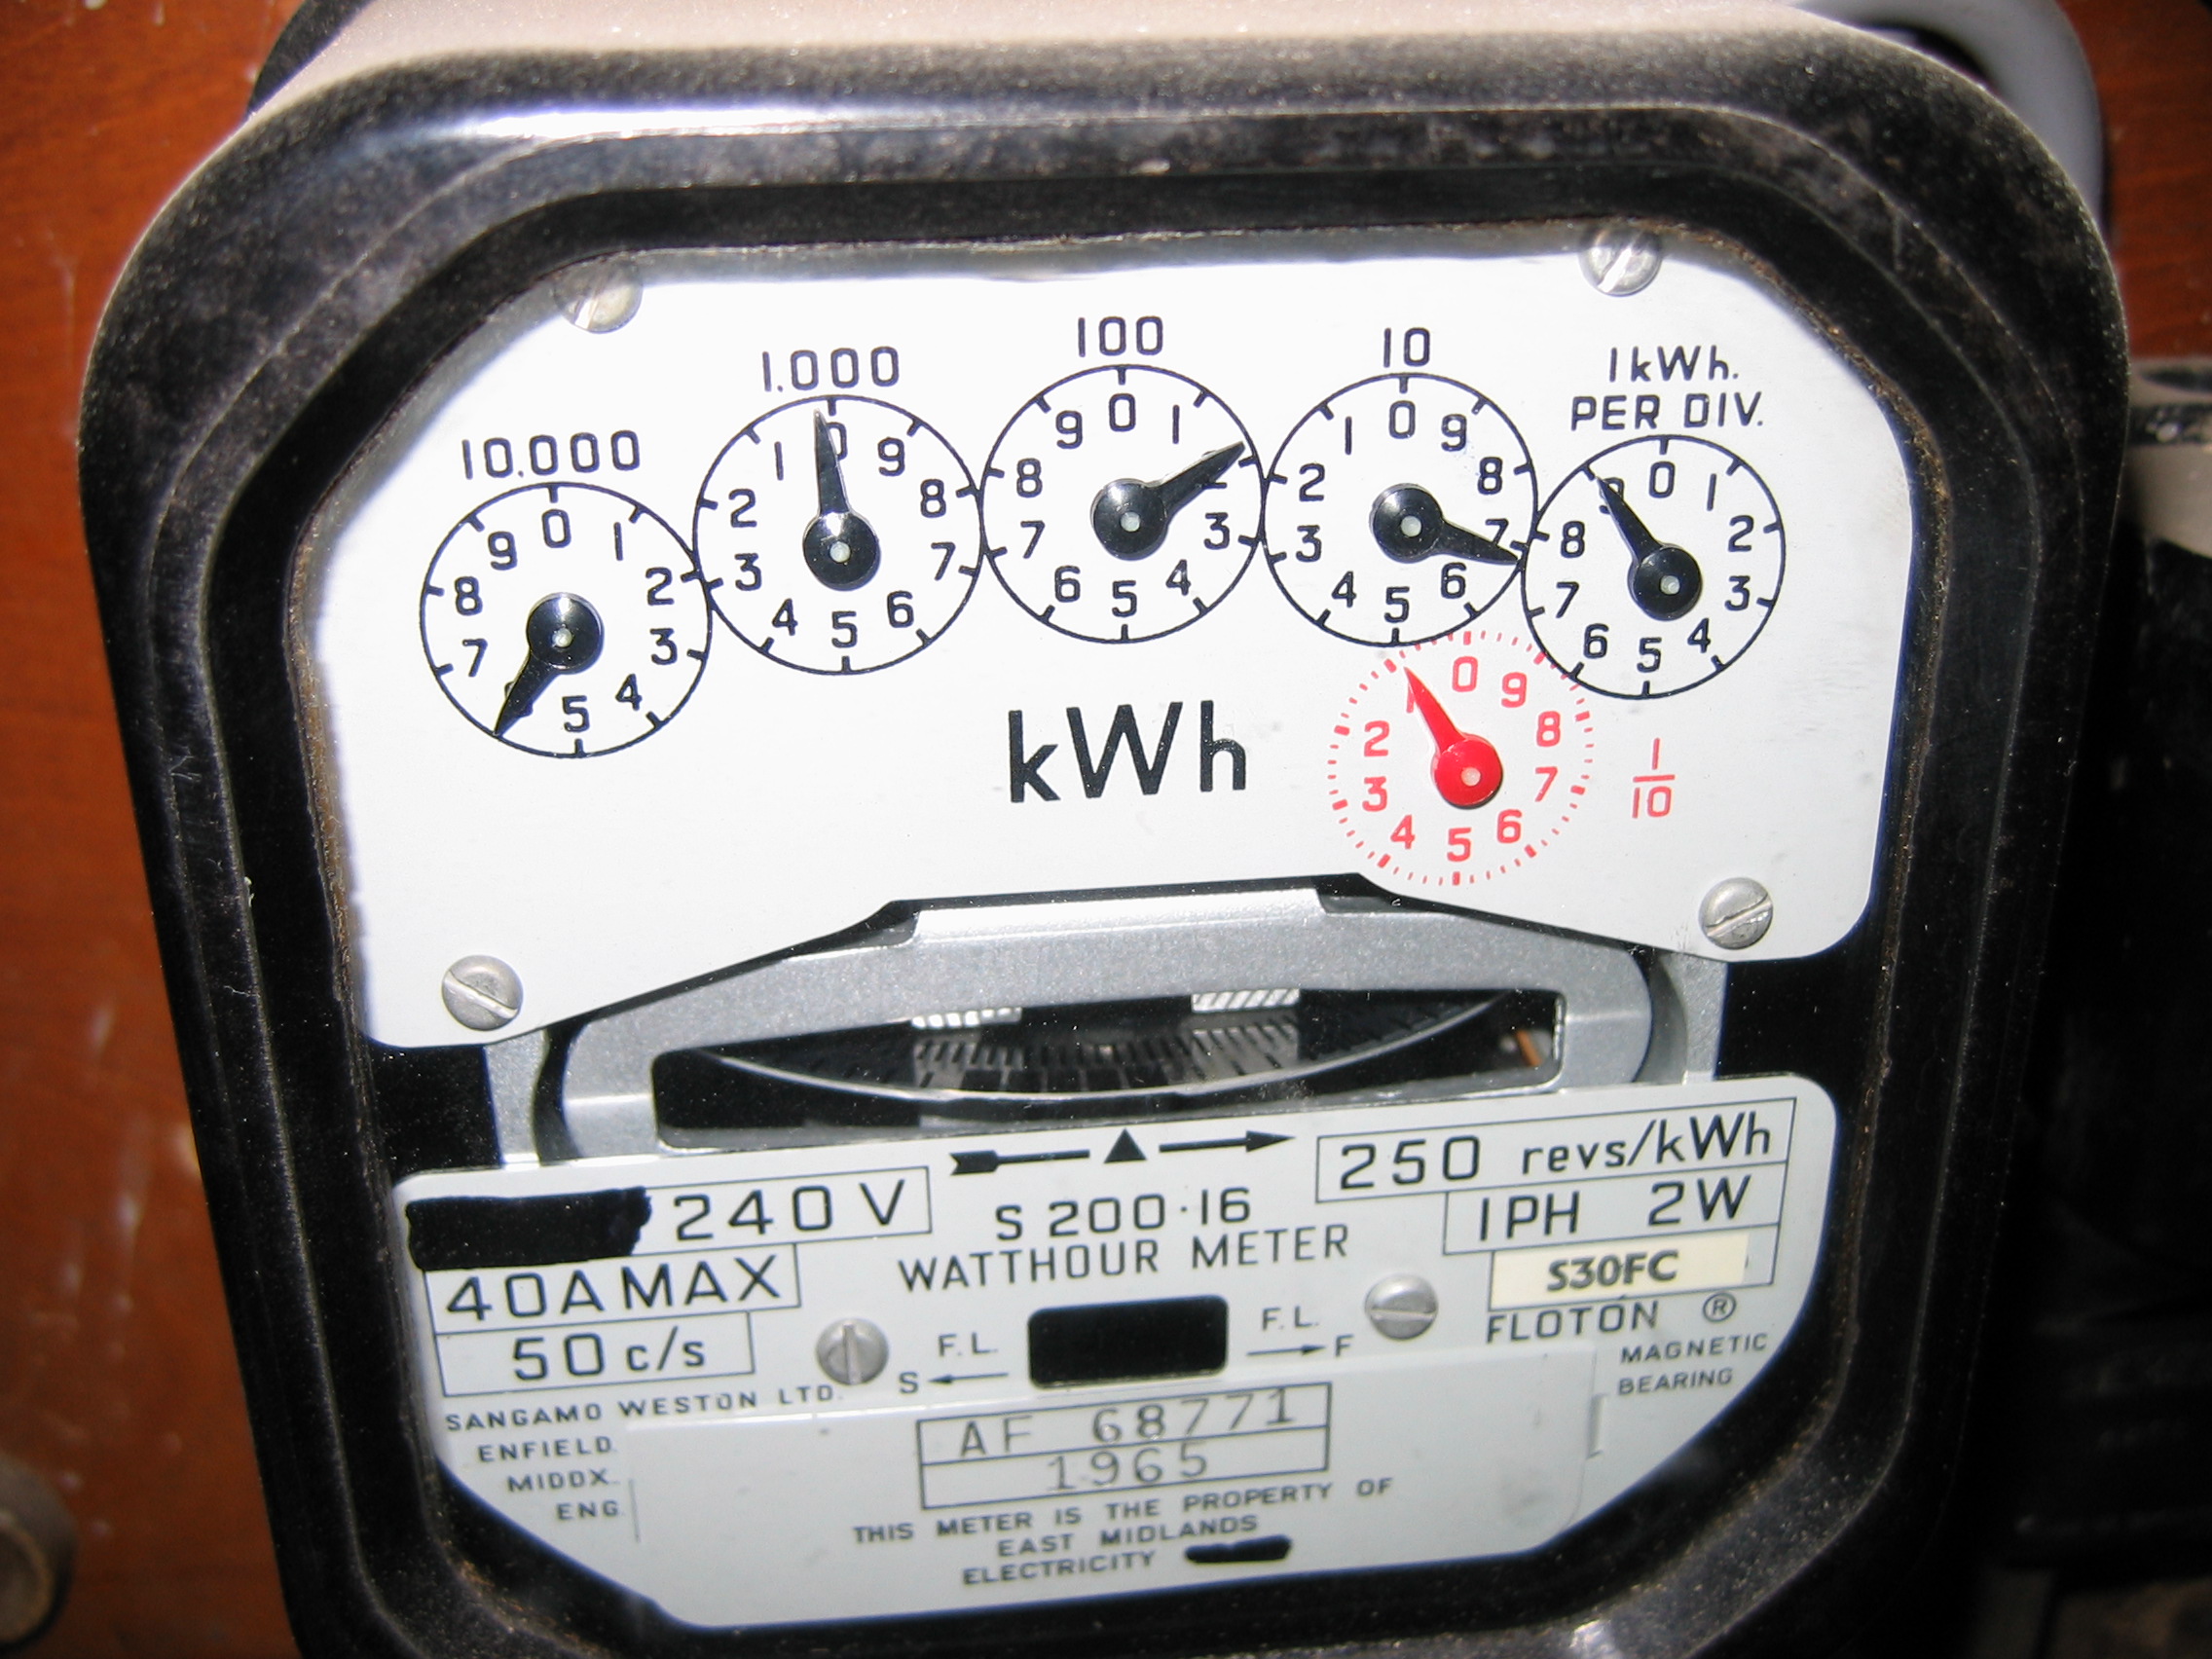 What type of electricity meter do I have